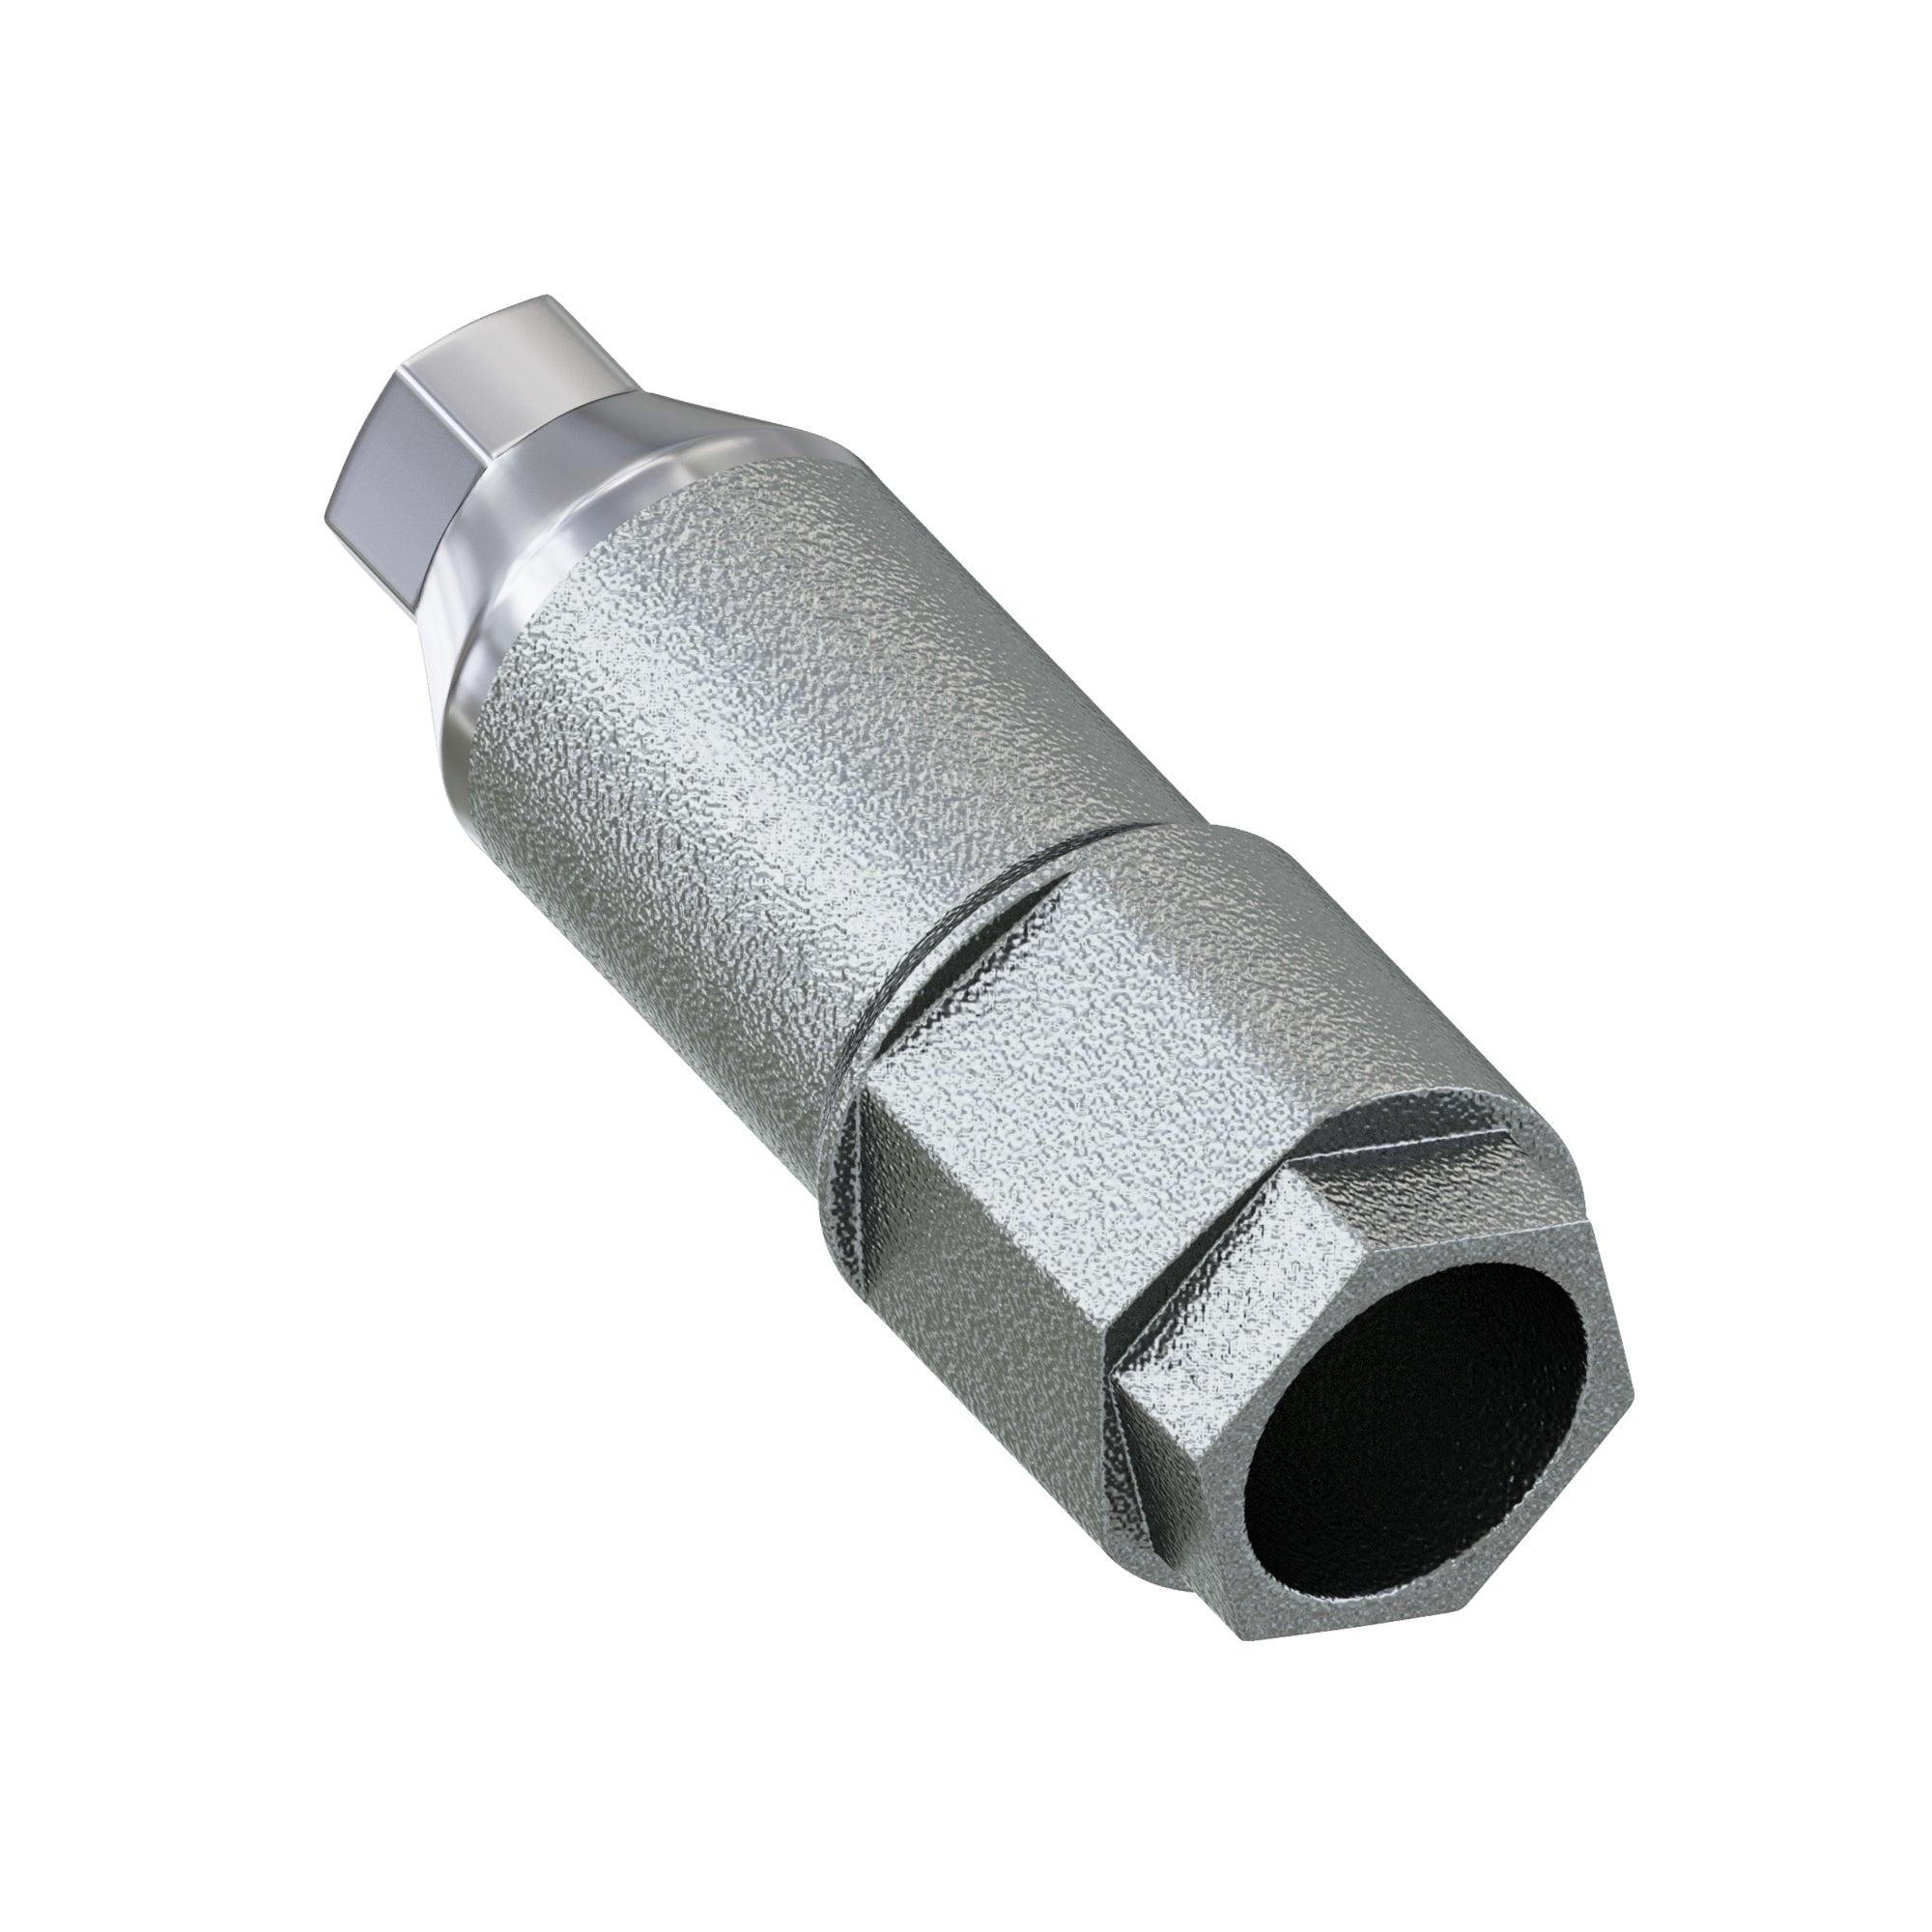 DSI Titanium Scan Post Body Conical Connection 3.5mm - Conical Connection RP Ø4.3-5.0mm